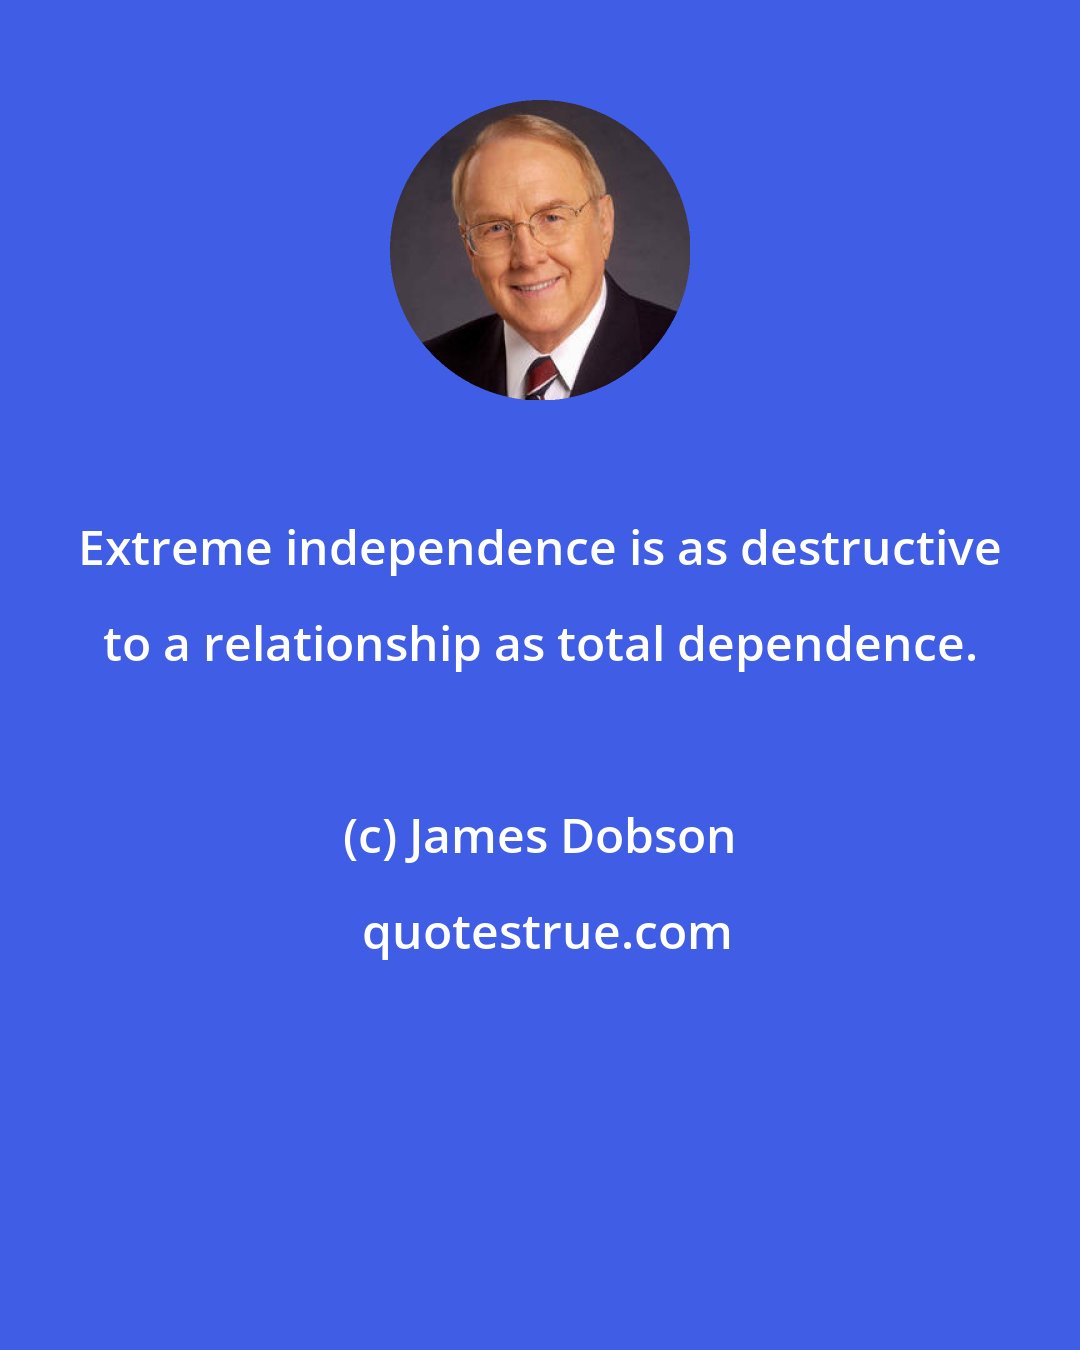 James Dobson: Extreme independence is as destructive to a relationship as total dependence.